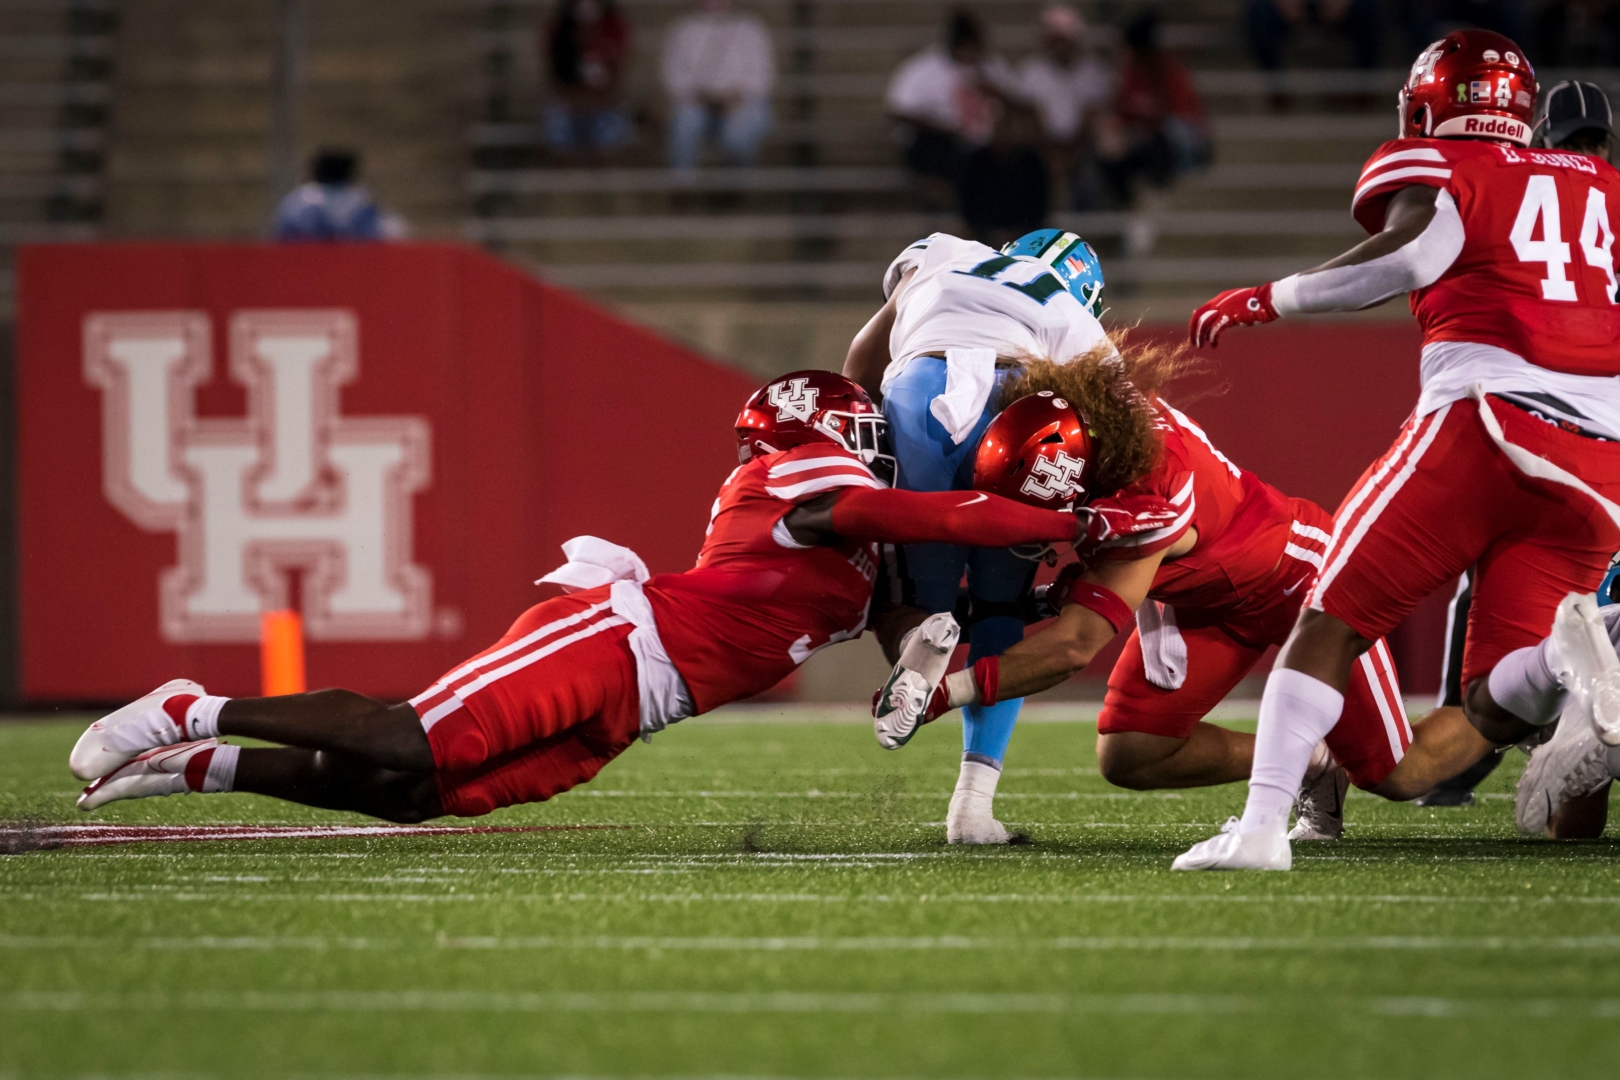 Senior linebacker Grant Stuard joins a teammate in bringing down a Tulane player during the 2020 opener at TDECU Stadium | Courtesy of UH athletics